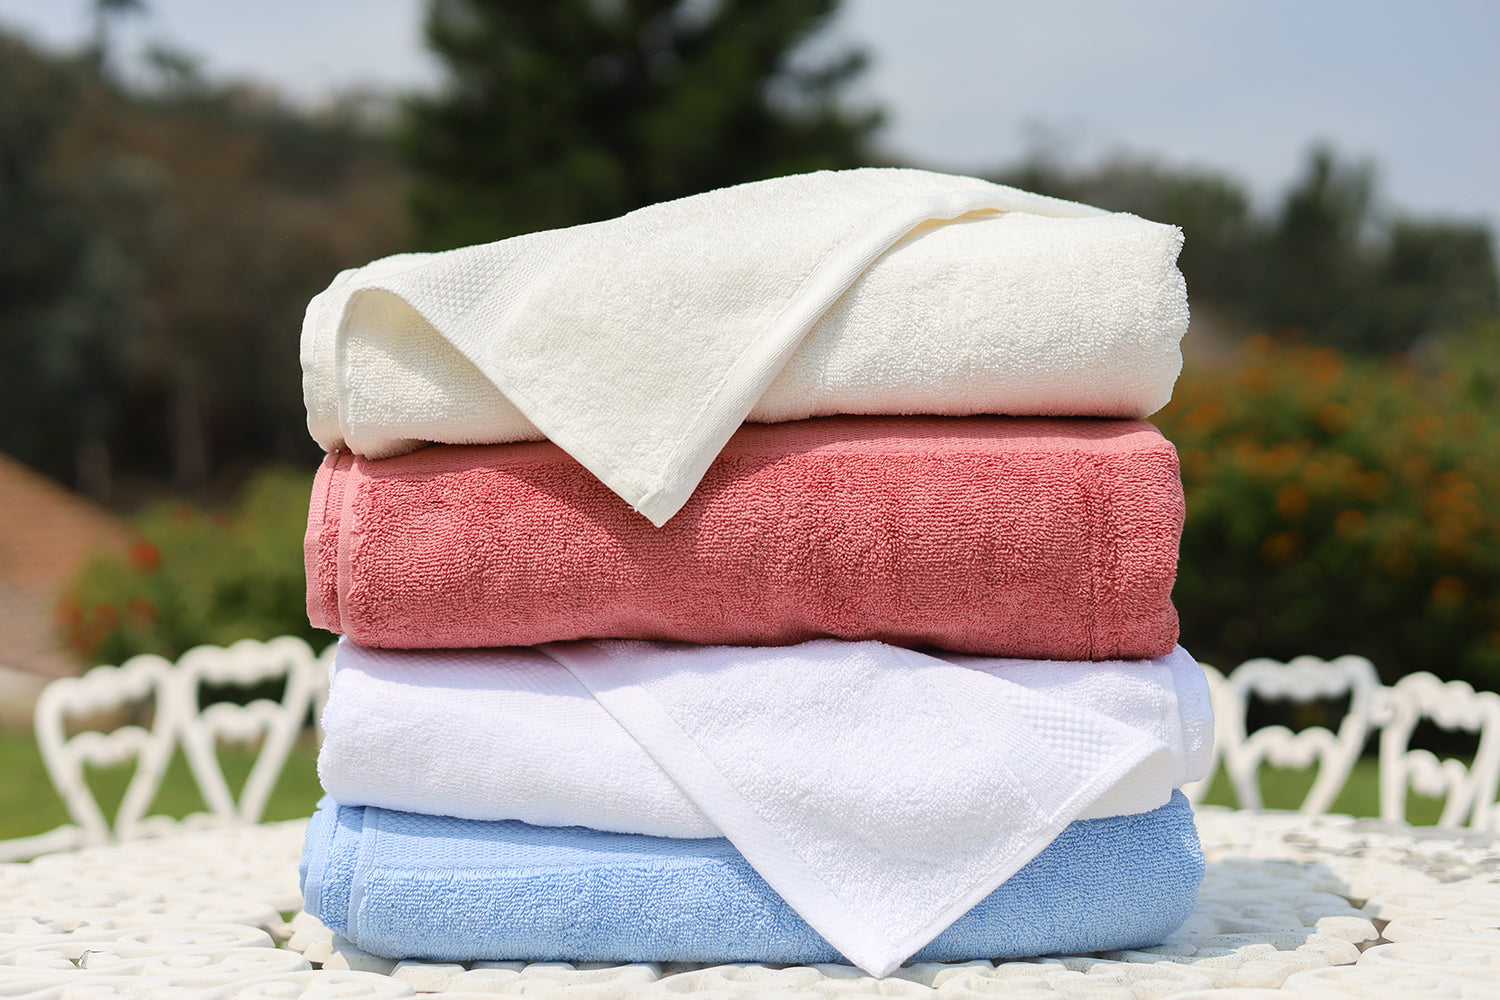 Organic Cotton Terry Cloth Fabric - Natural Color